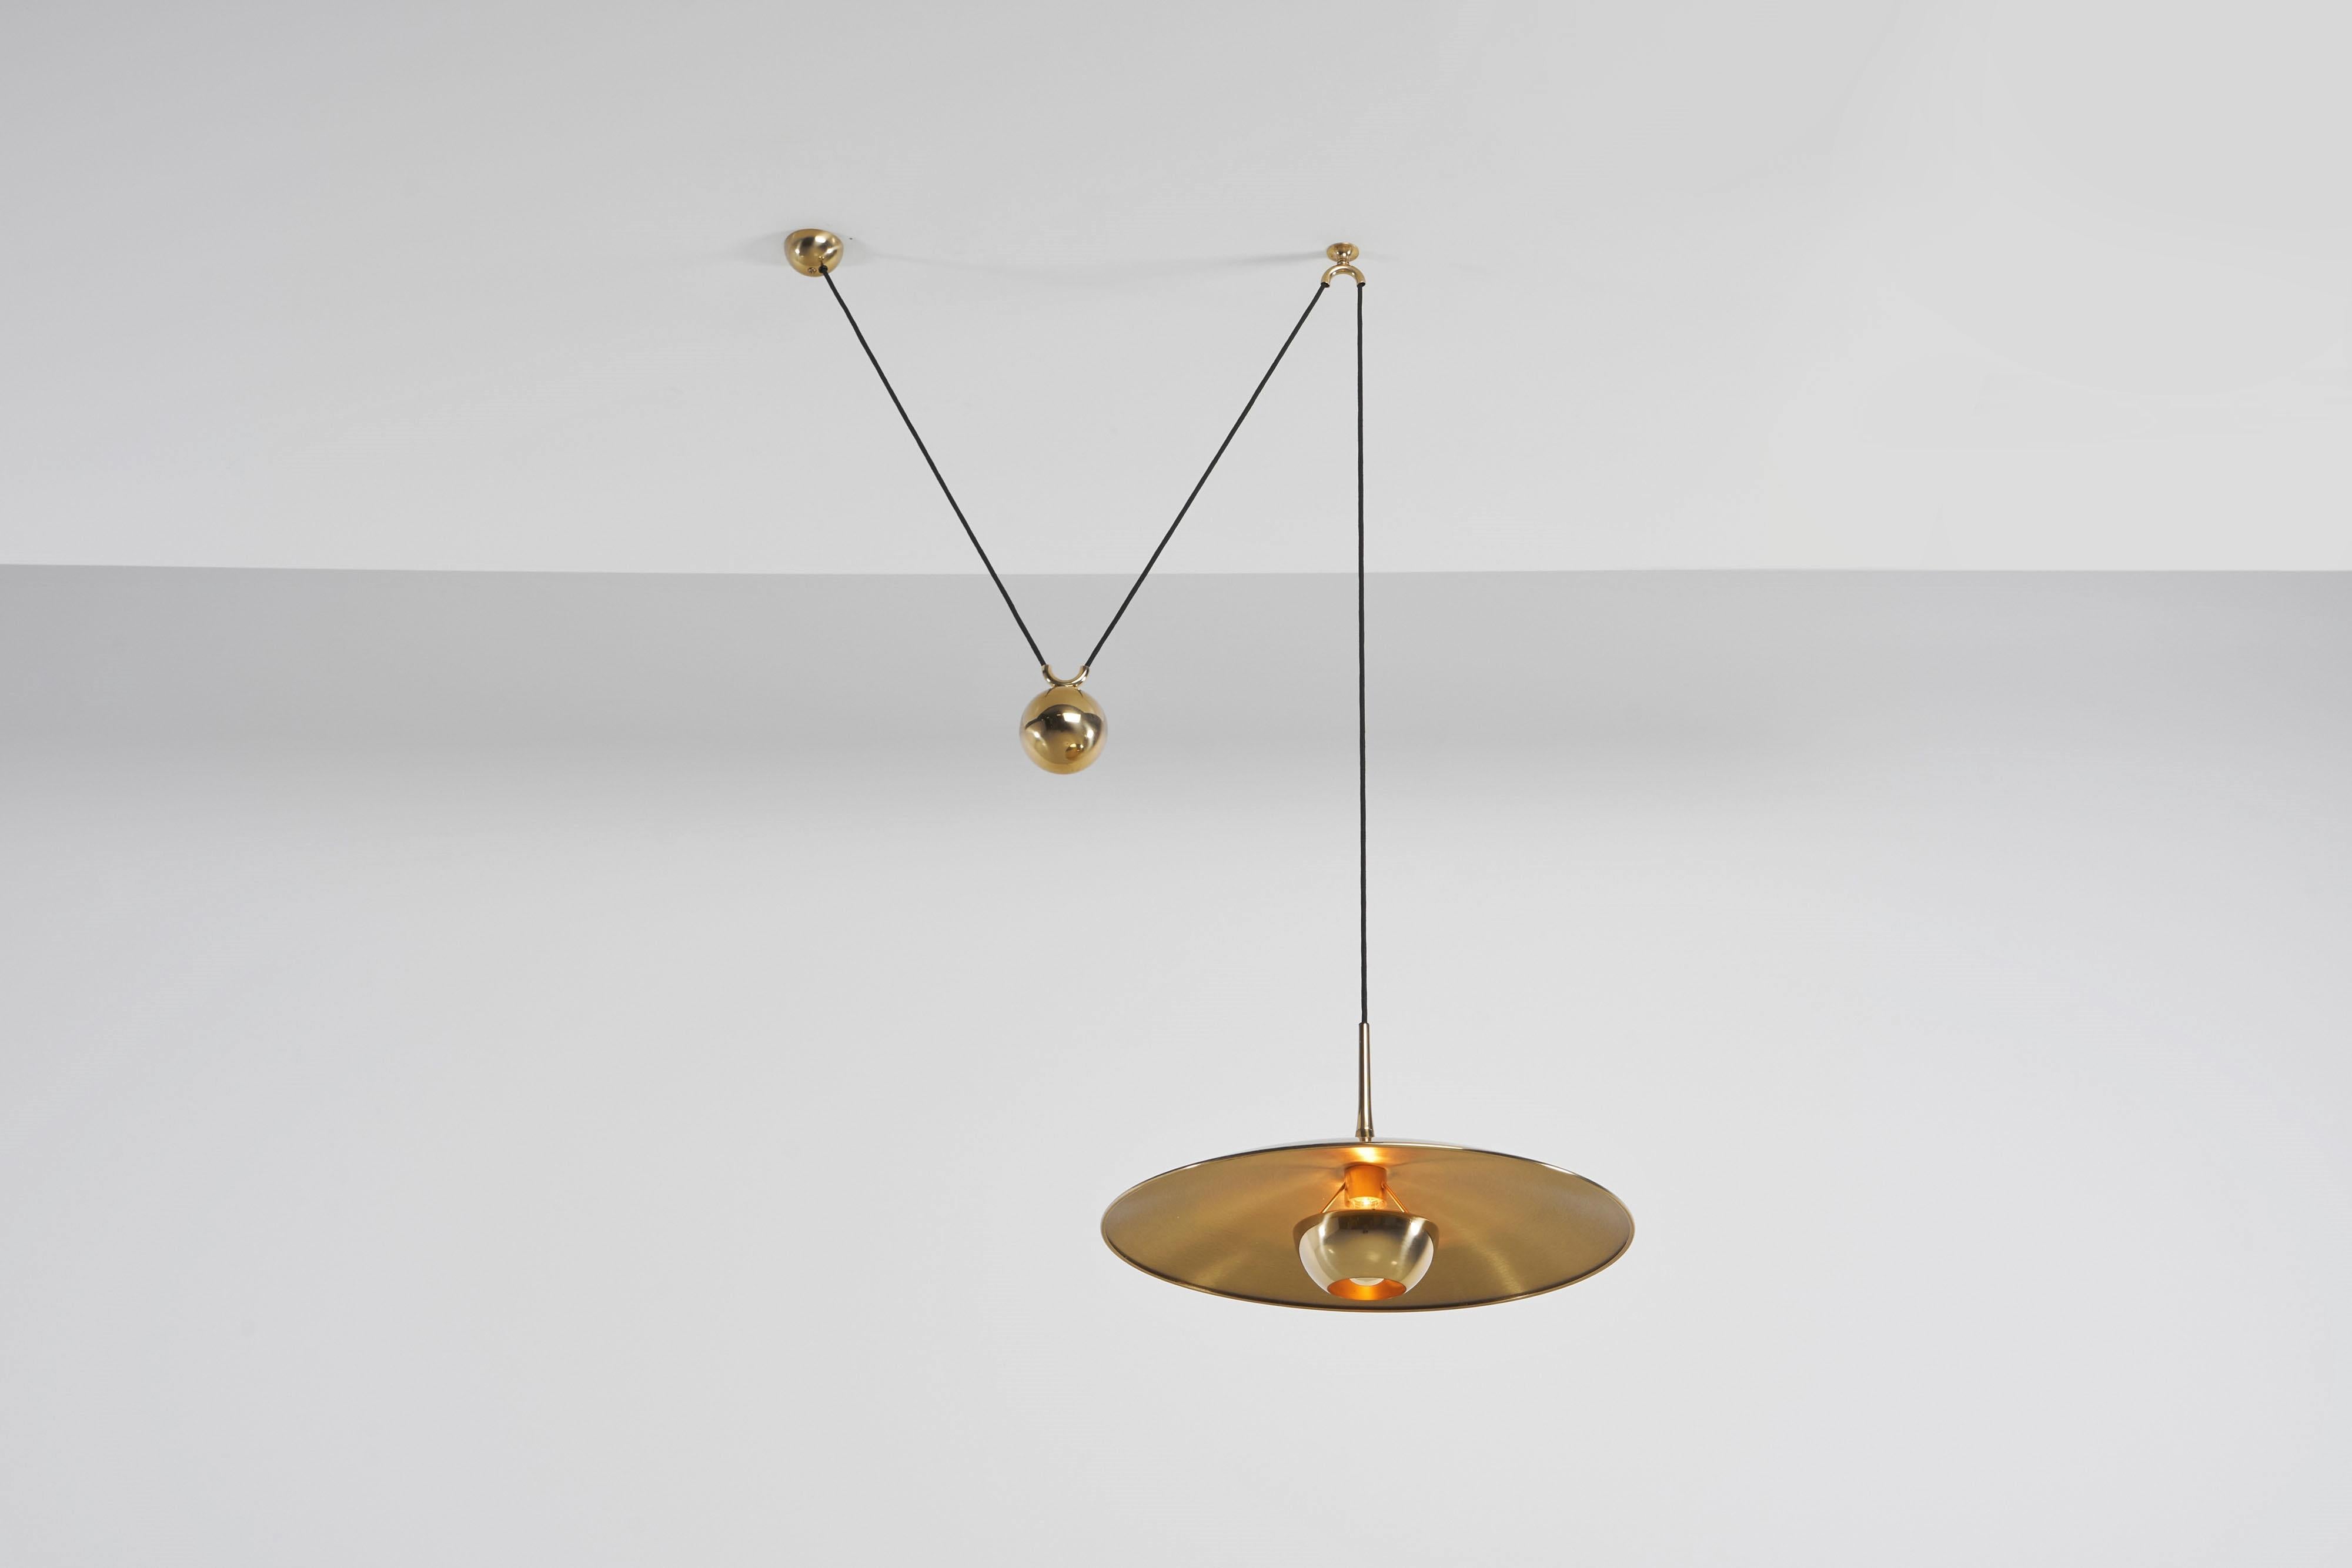 Very nice and versatile adjustable ceiling pendant lamp model Onos 55 designed and manufactured by Florian Schulz, Germany 1970. This lamp is made of polished brass and has a heavy weighted round ball to adjust the height on this, you can also